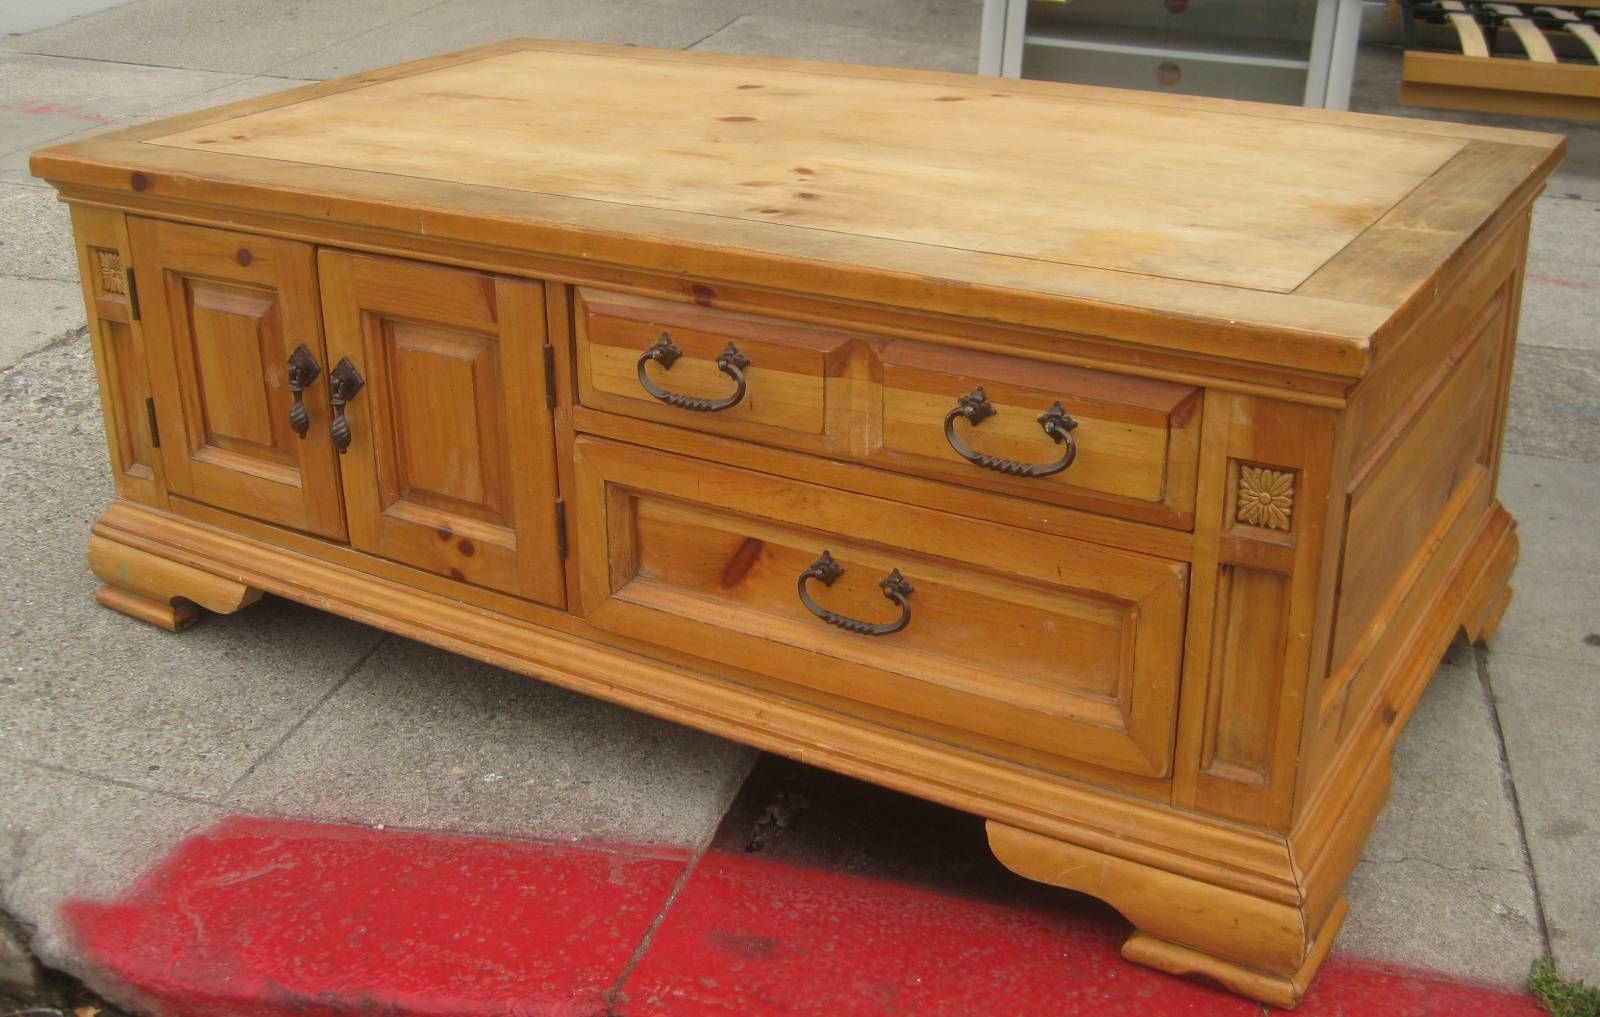 Uhuru Furniture & Collectibles: Sold – Pine Coffee Table W Throughout Pine Coffee Tables With Storage (View 5 of 30)